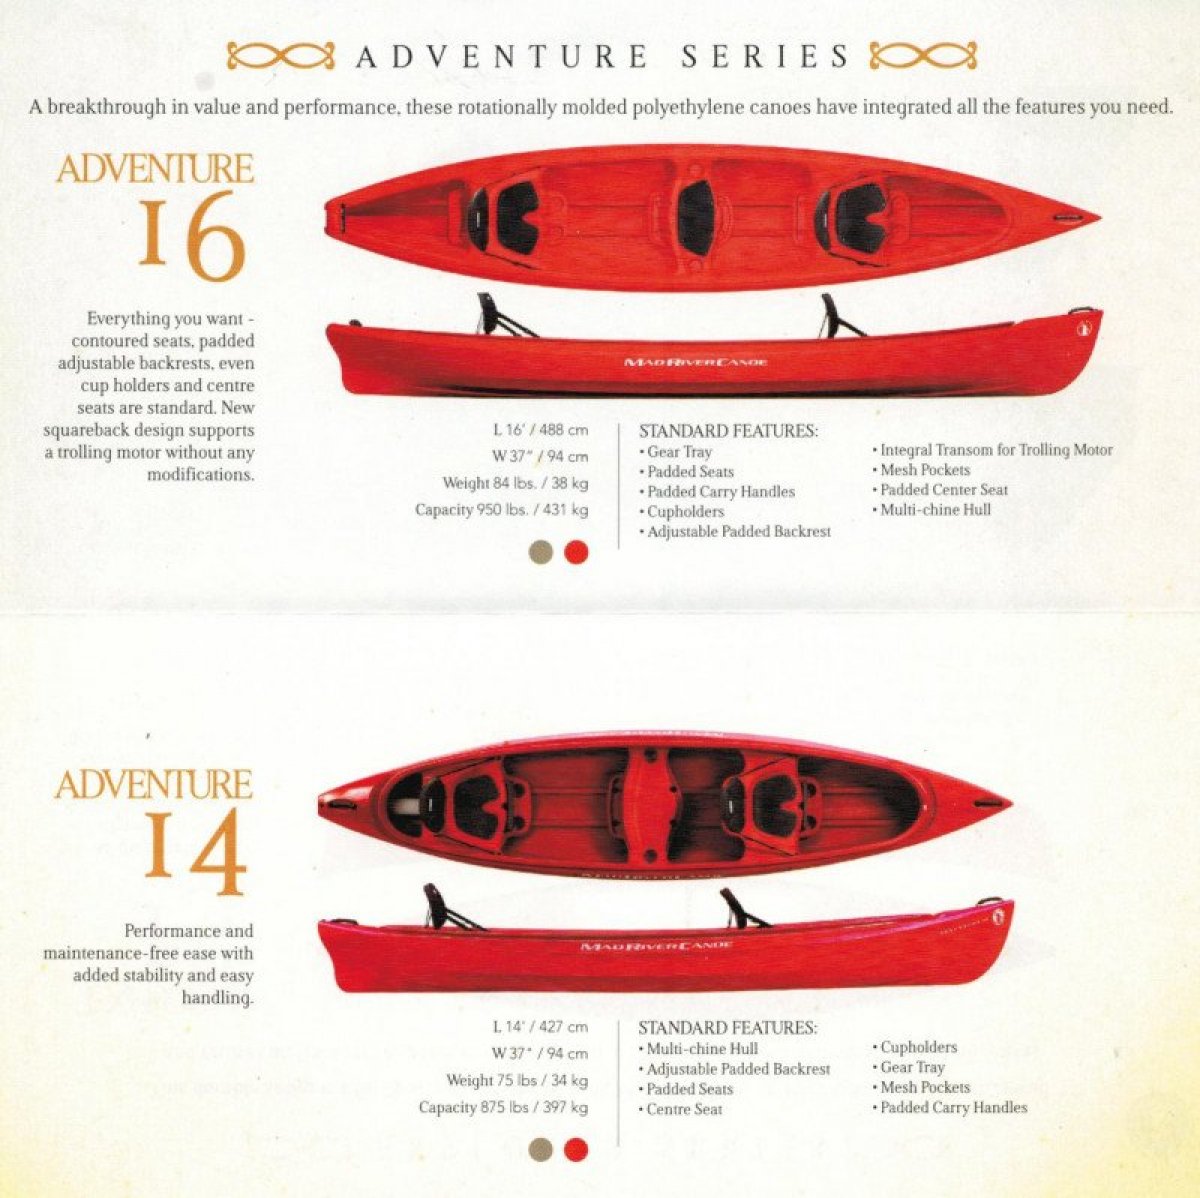 Brand new Mad River Adventure 14 3 seater canadian canoe in stock